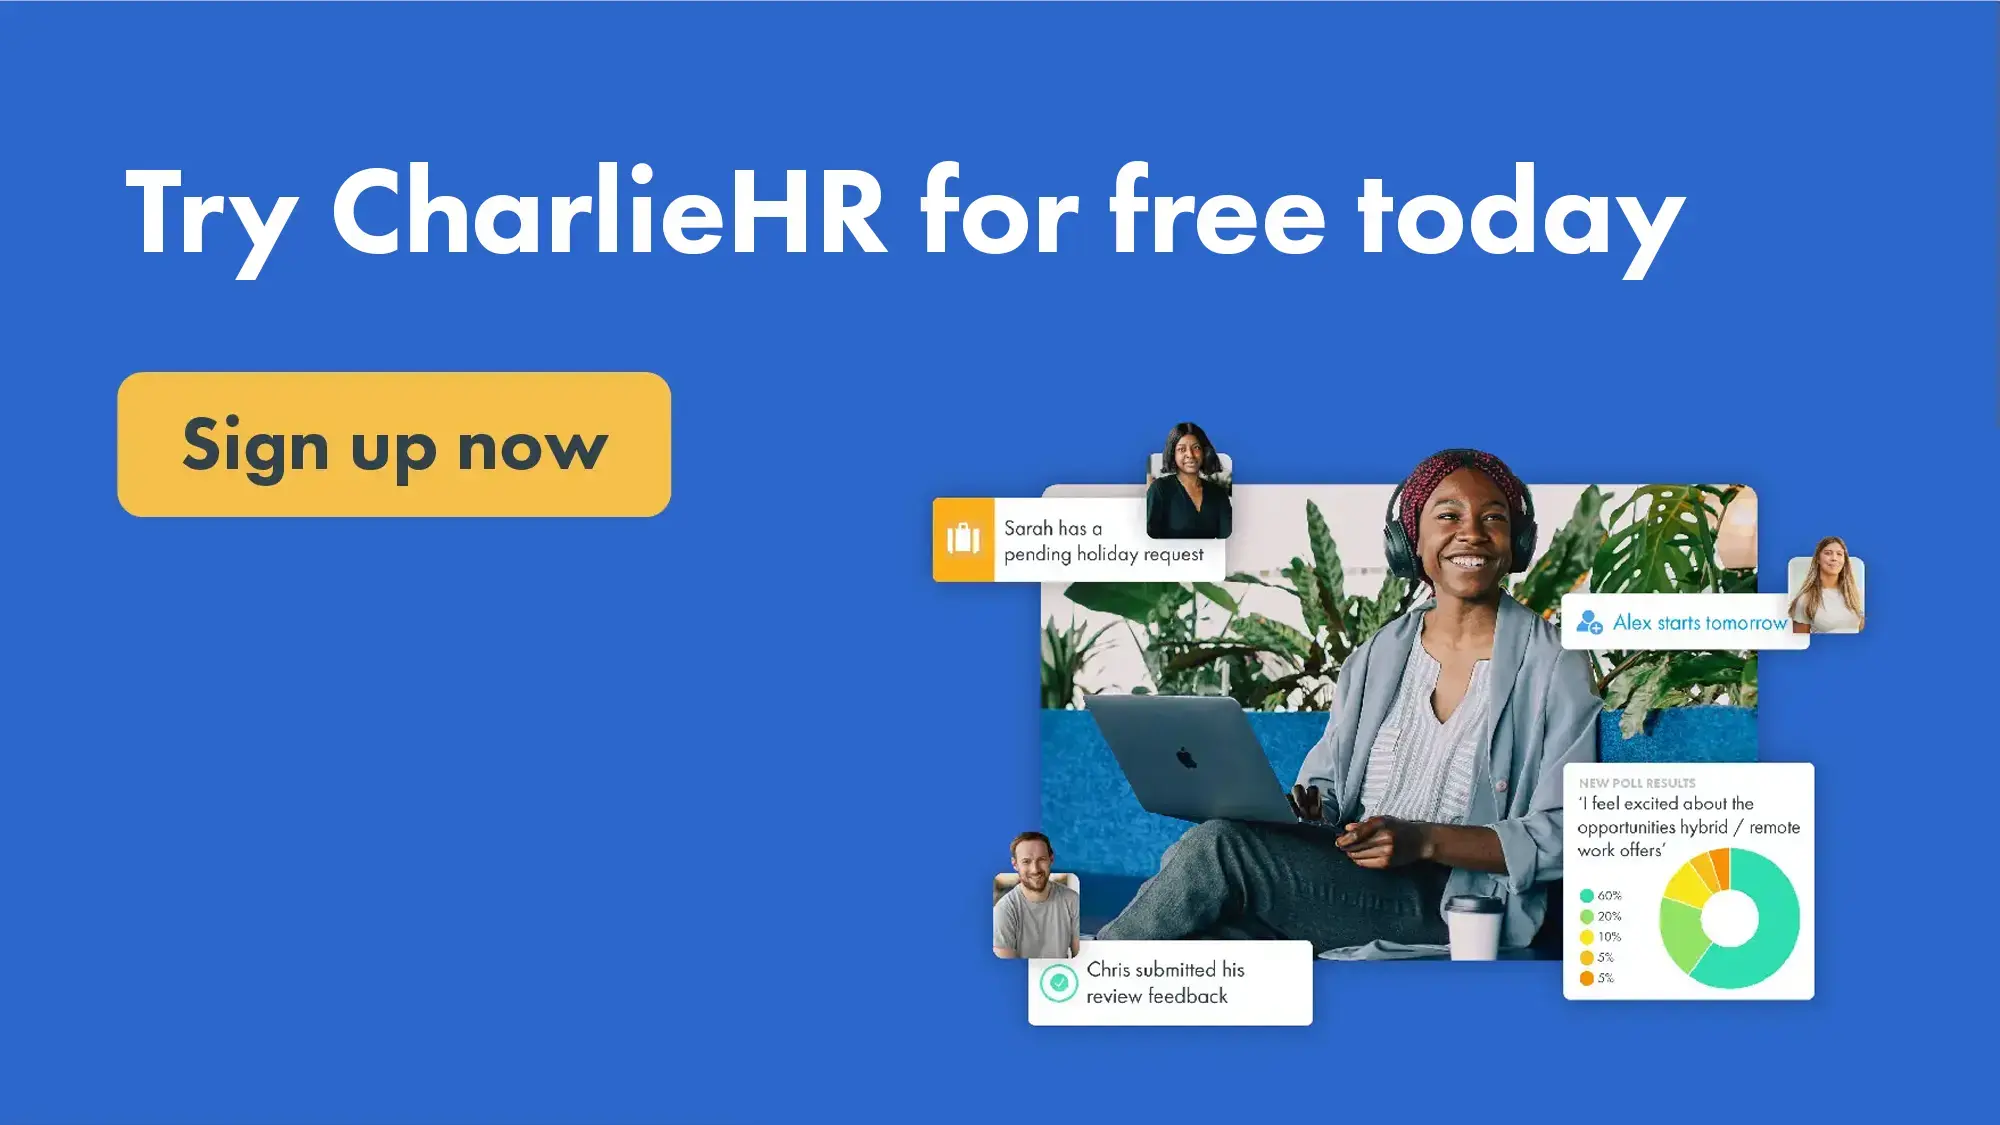 Click here to start a trial of CharlieHR